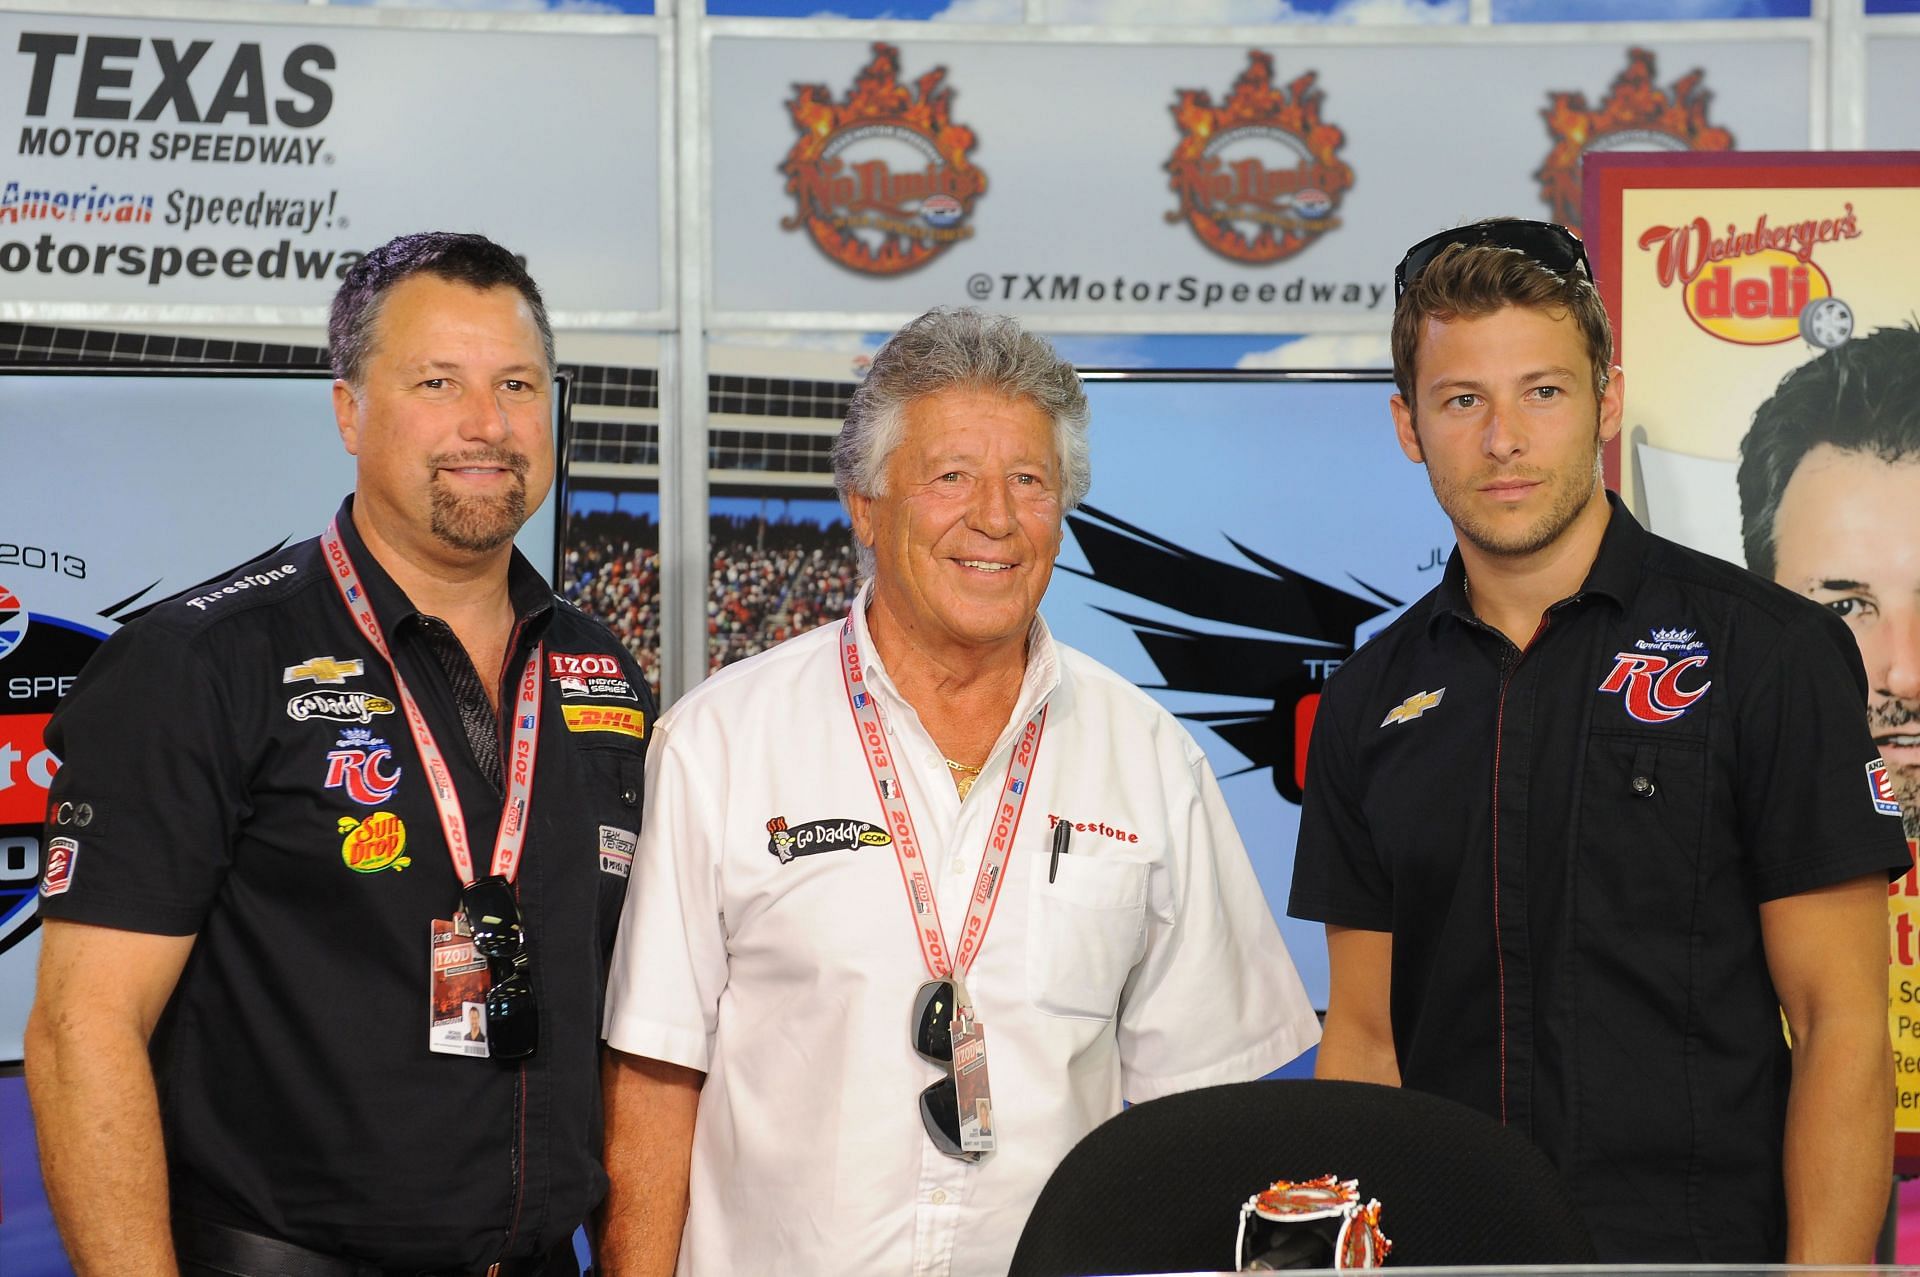 Former F1 world champion Mario Andretti (C) with his son and team owner Michael Andretti (L) and grandson Marco Andretti (R), driver of the #25 RC Cola Andretti Autosport Chevrolet, before the IZOD IndyCar Series Firestone 550 (Photo by Will Schneekloth/Getty Images for Texas Motor Speedway)